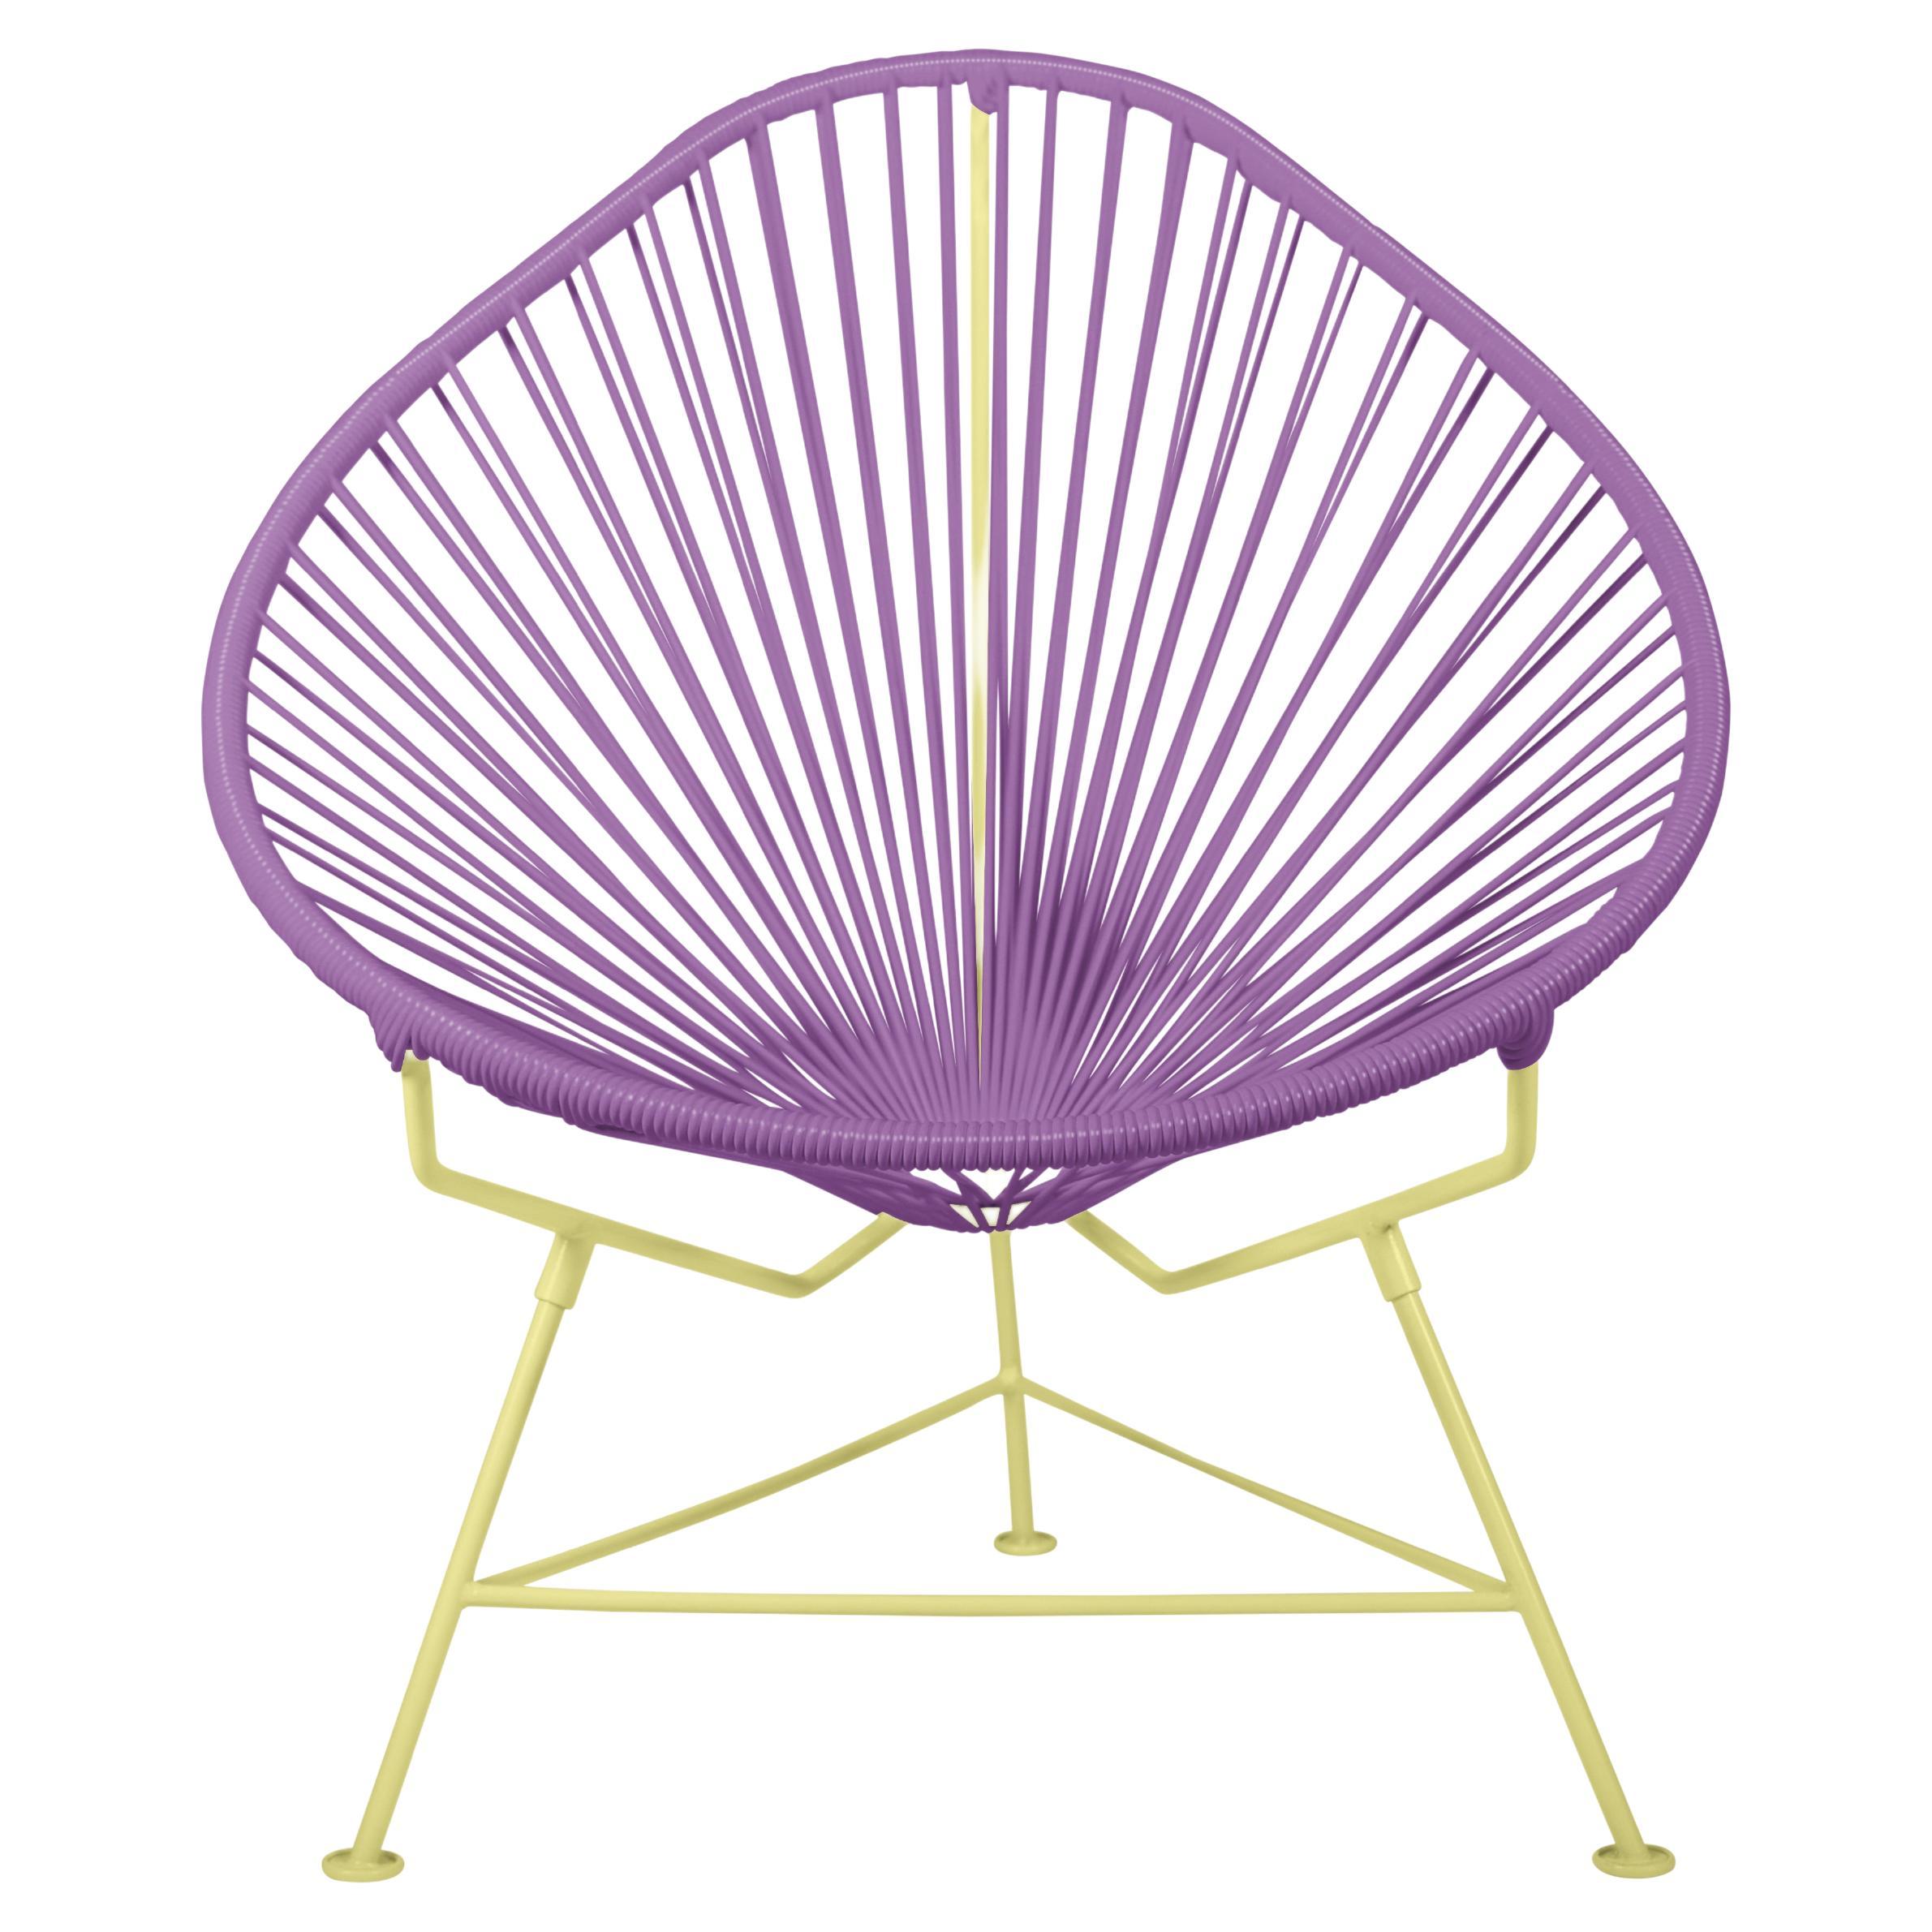 Innit Designs Acapulco Chair Orchid Weave on Yellow Frame